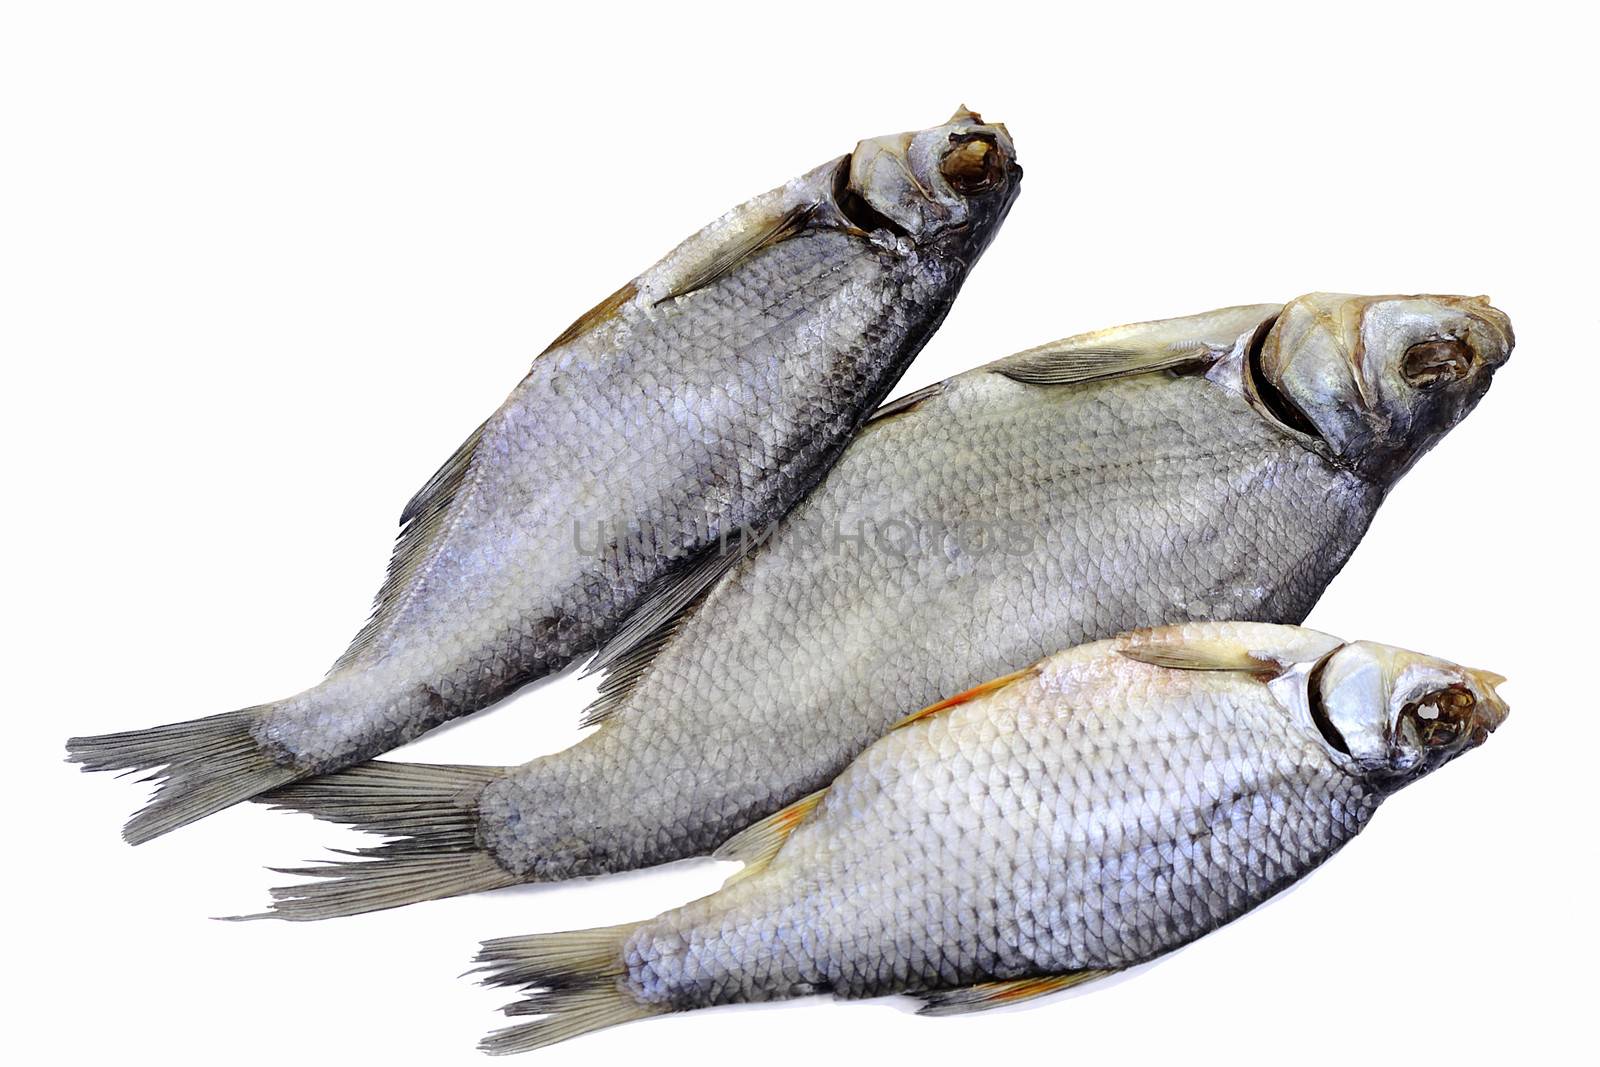 Three river fish, salted and dried . Presented on a white background.
